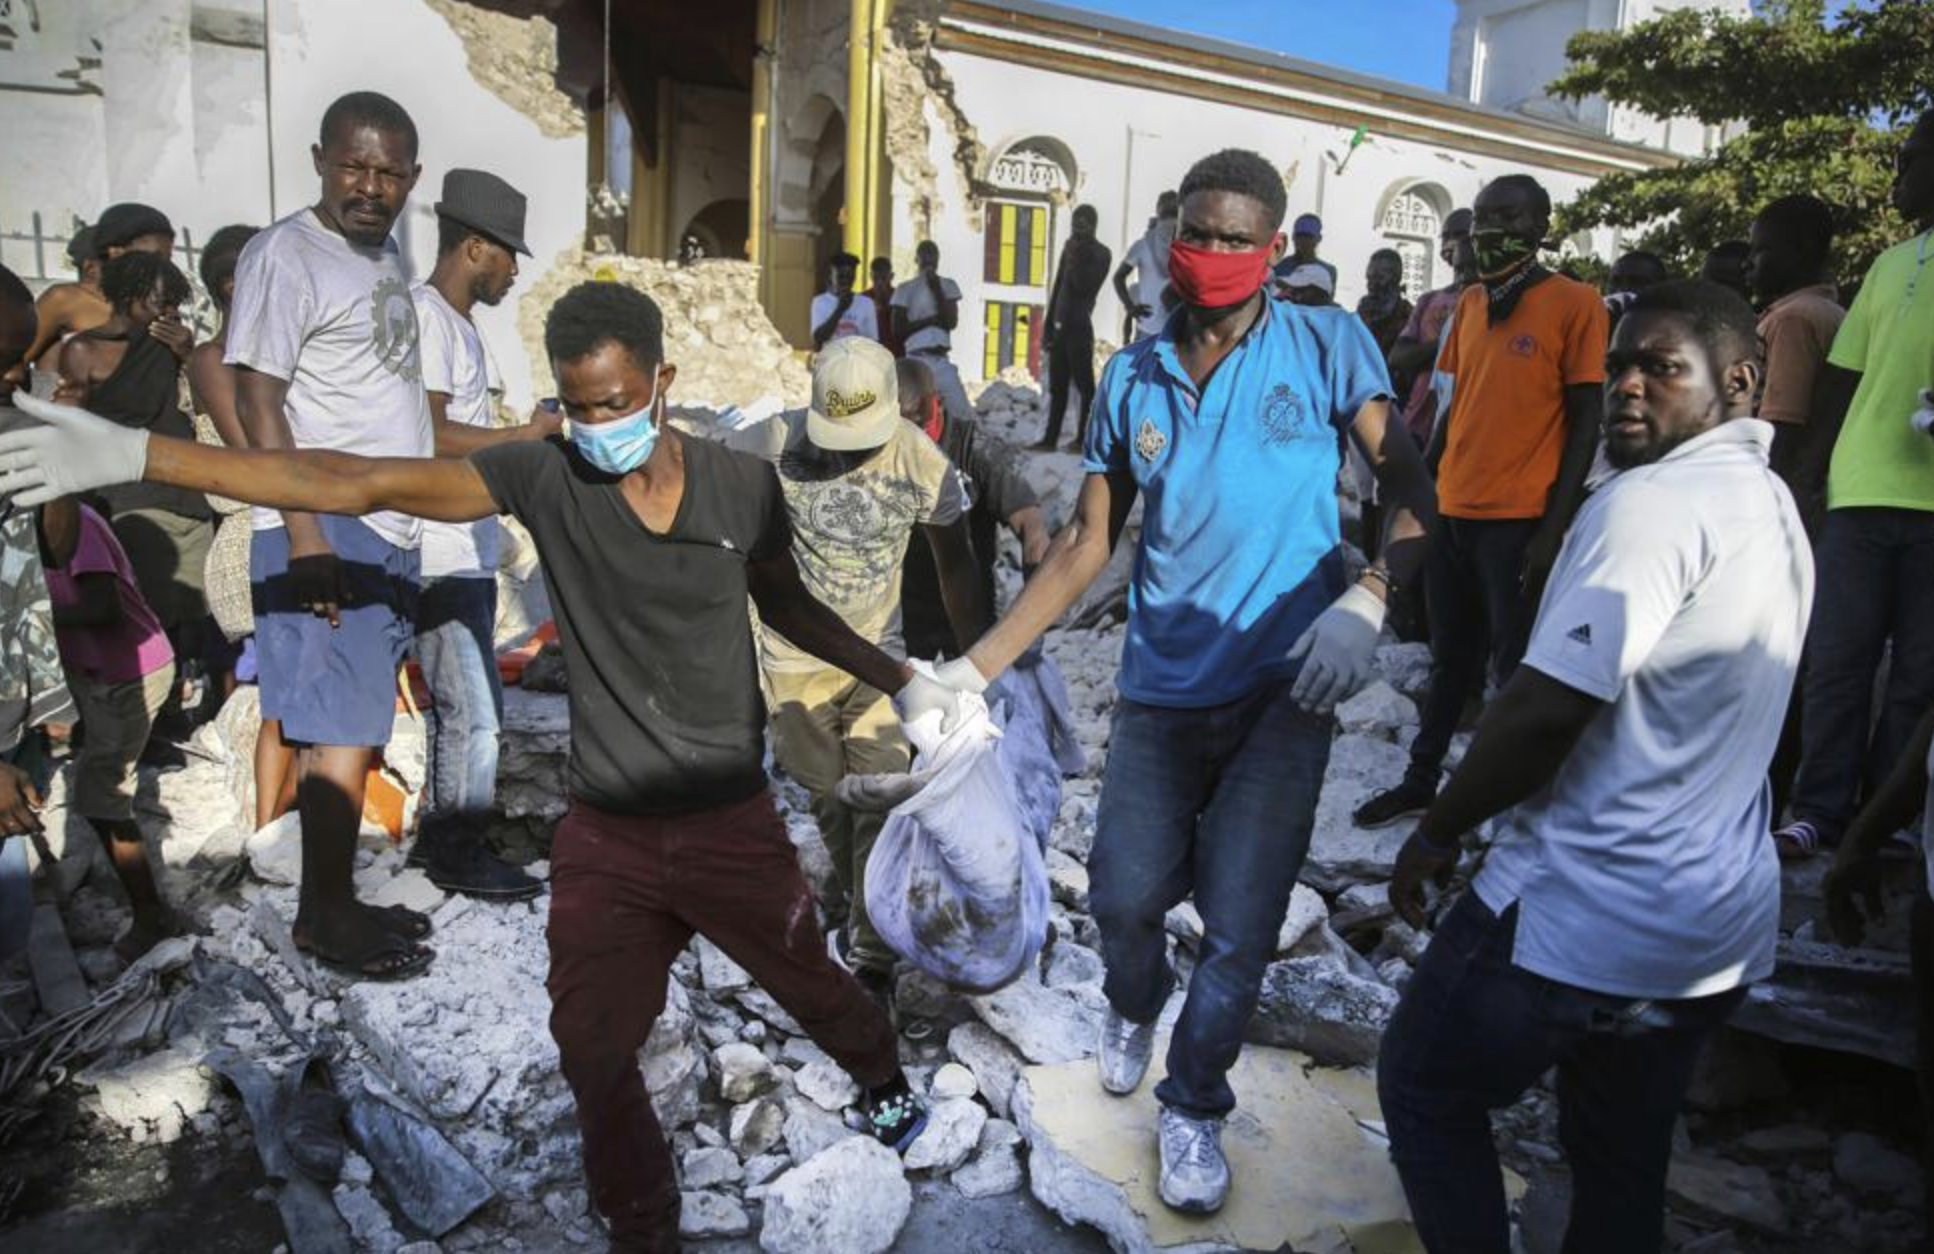 VIDEO: Haitians are searching collapsed buildings for survivors and the dead after the weekend’s massive earthquake